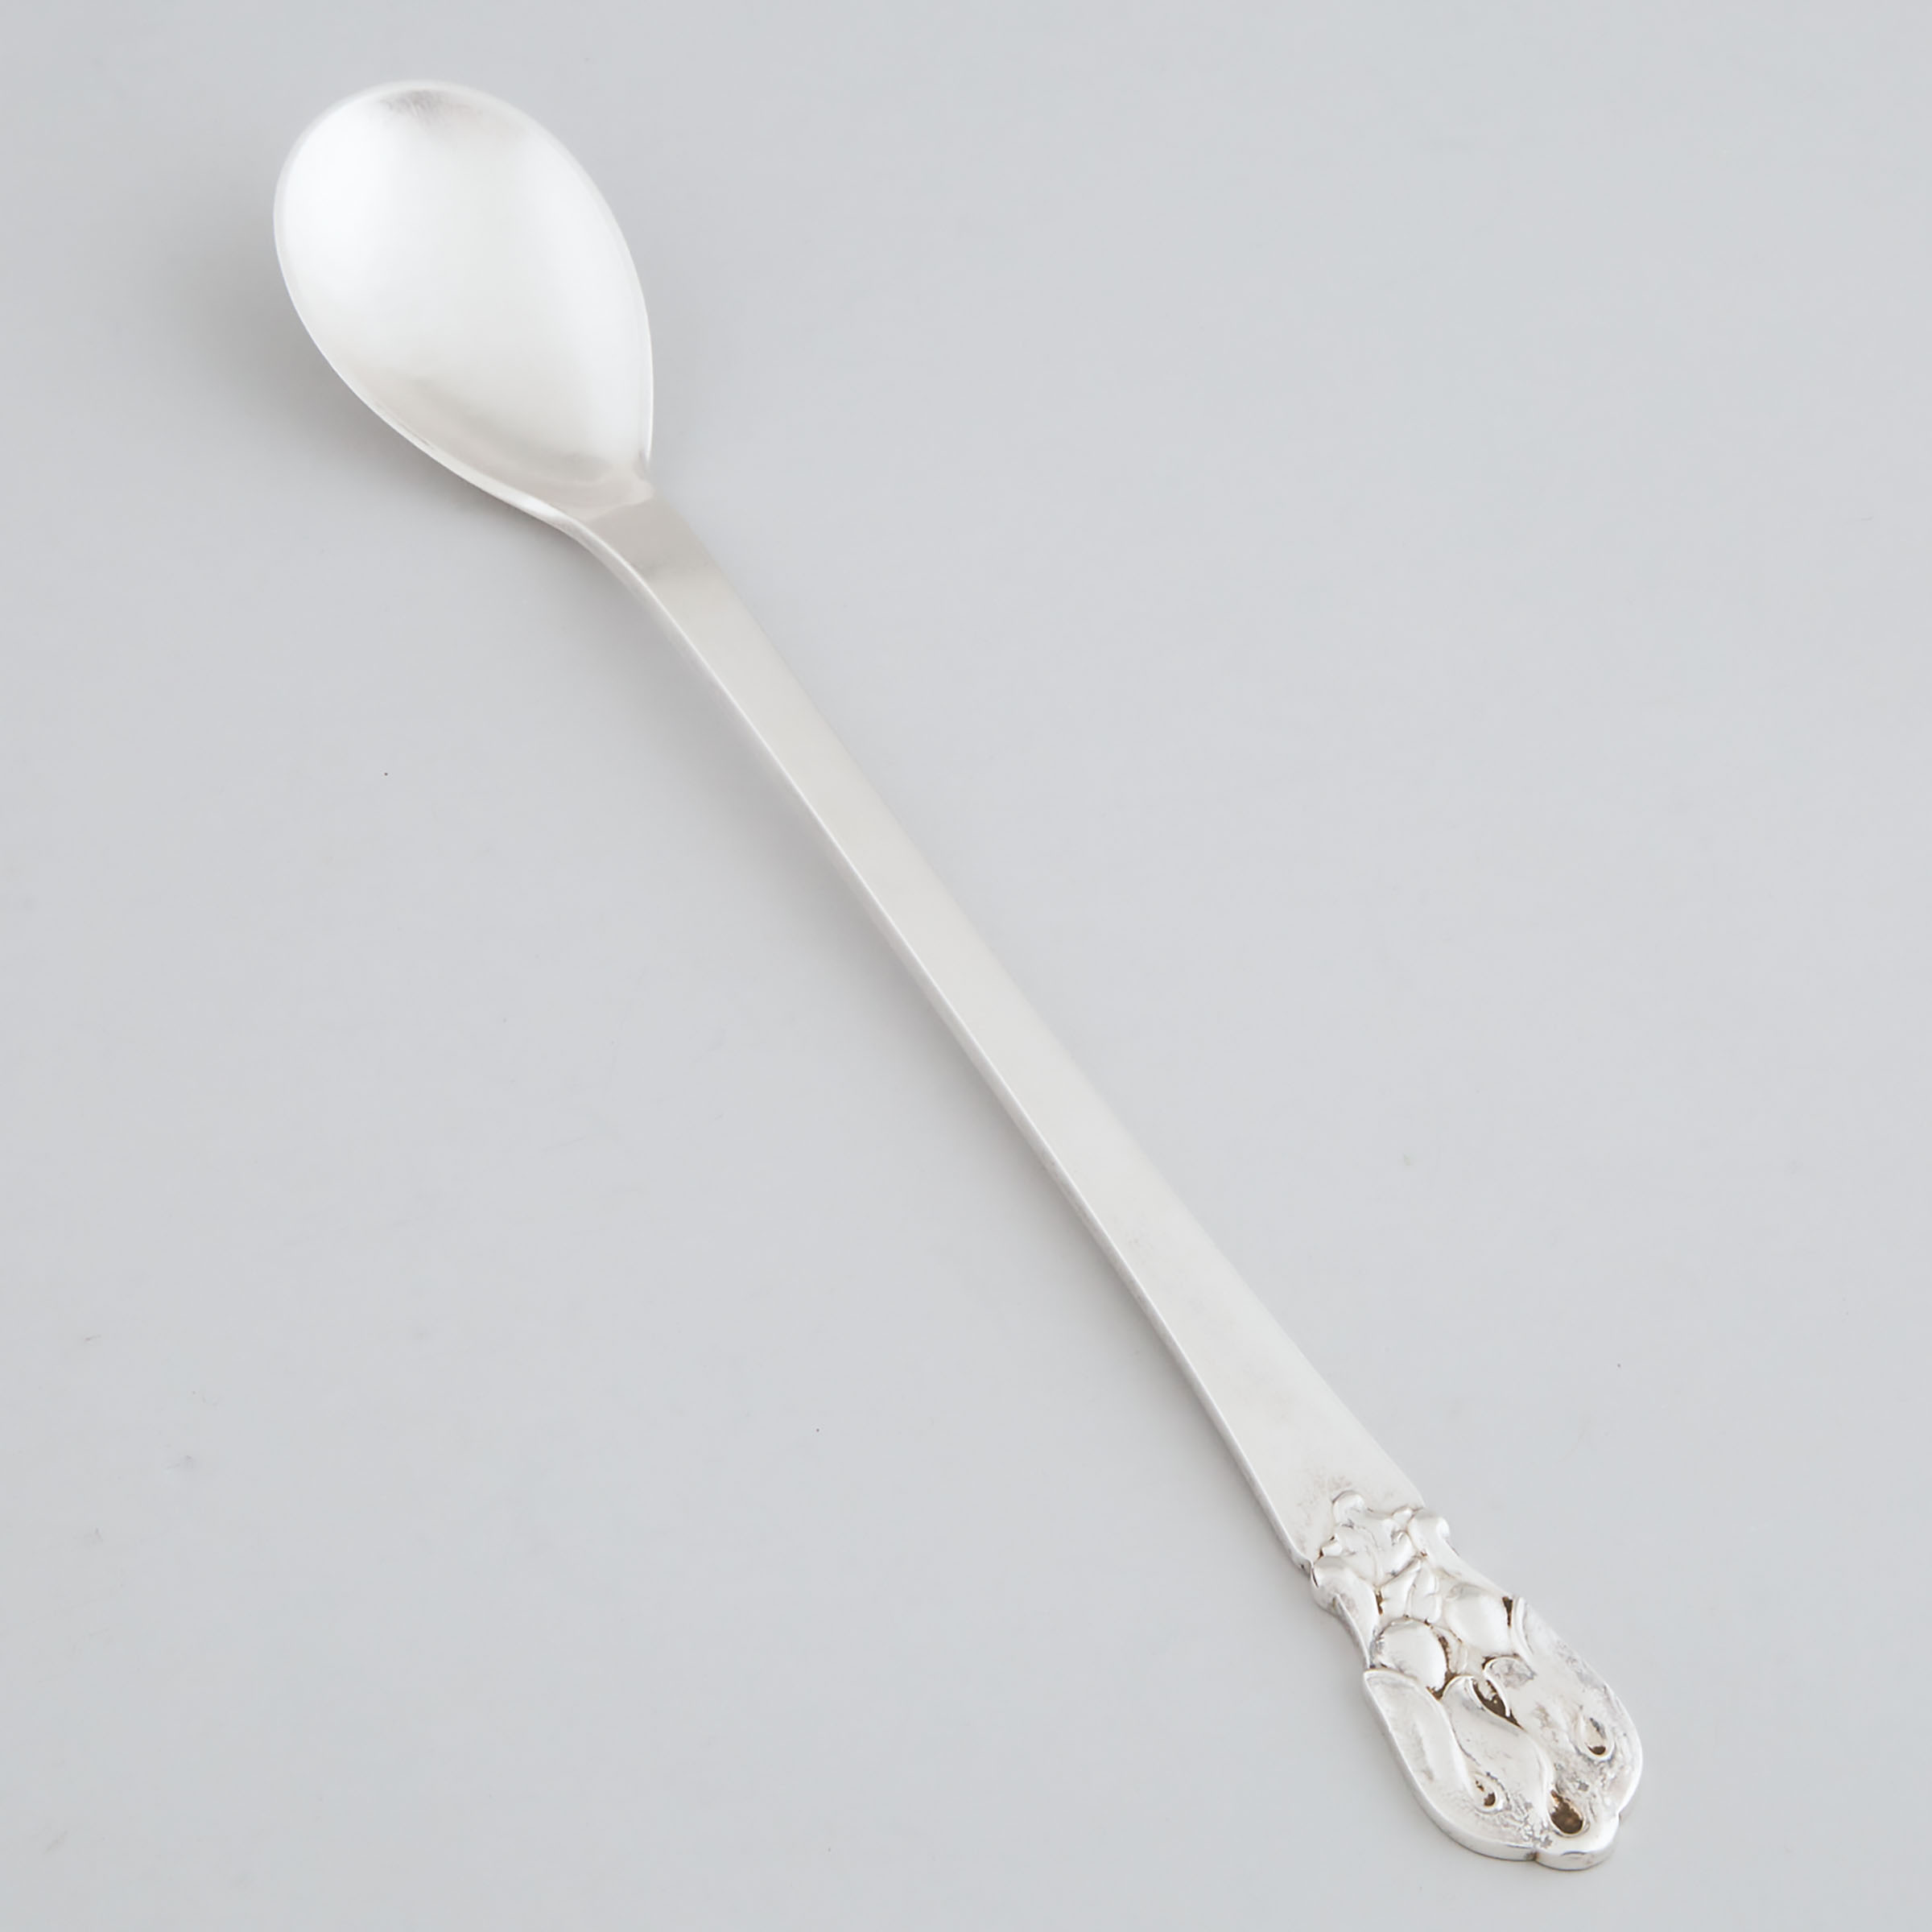 Canadian Silver Large Bar Spoon, Poul Petersen, Montreal, Que., mid-20th century